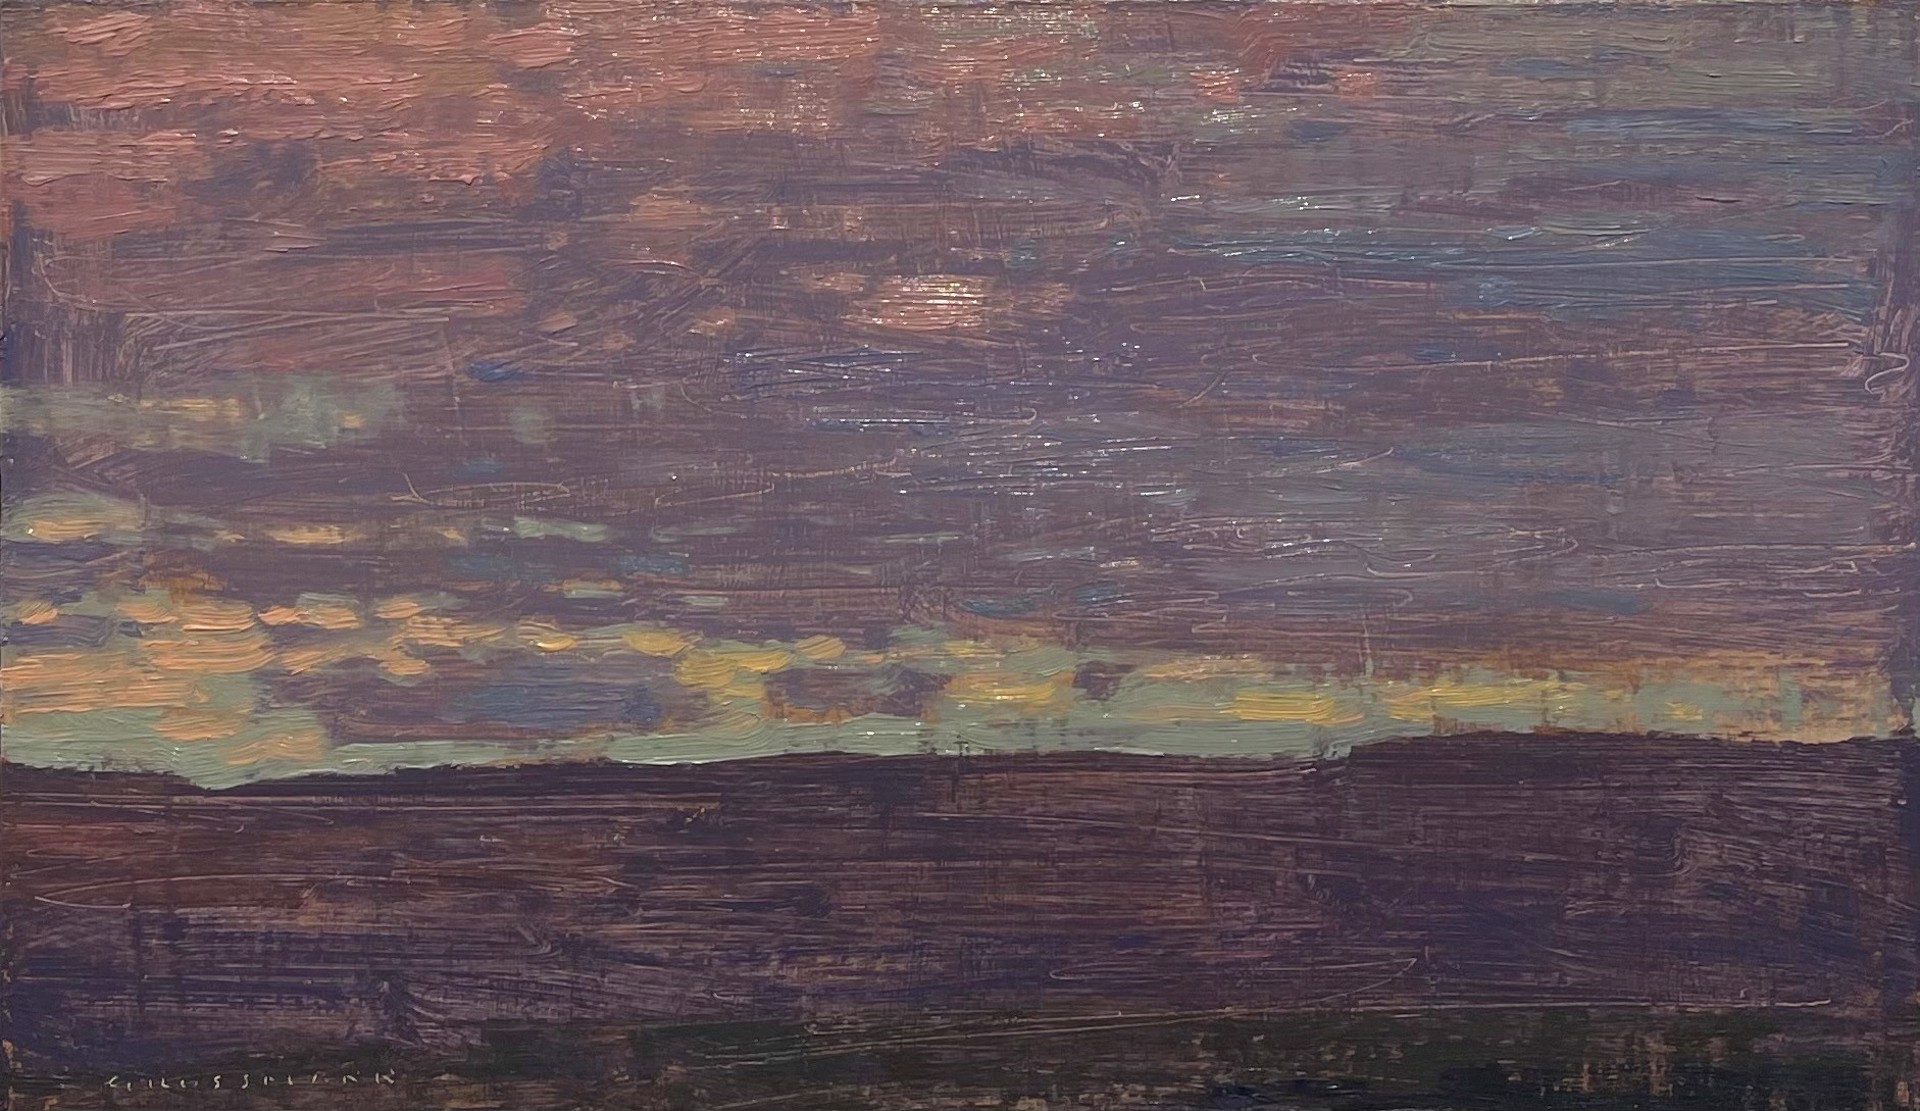 Evening View to the South West by David Grossmann